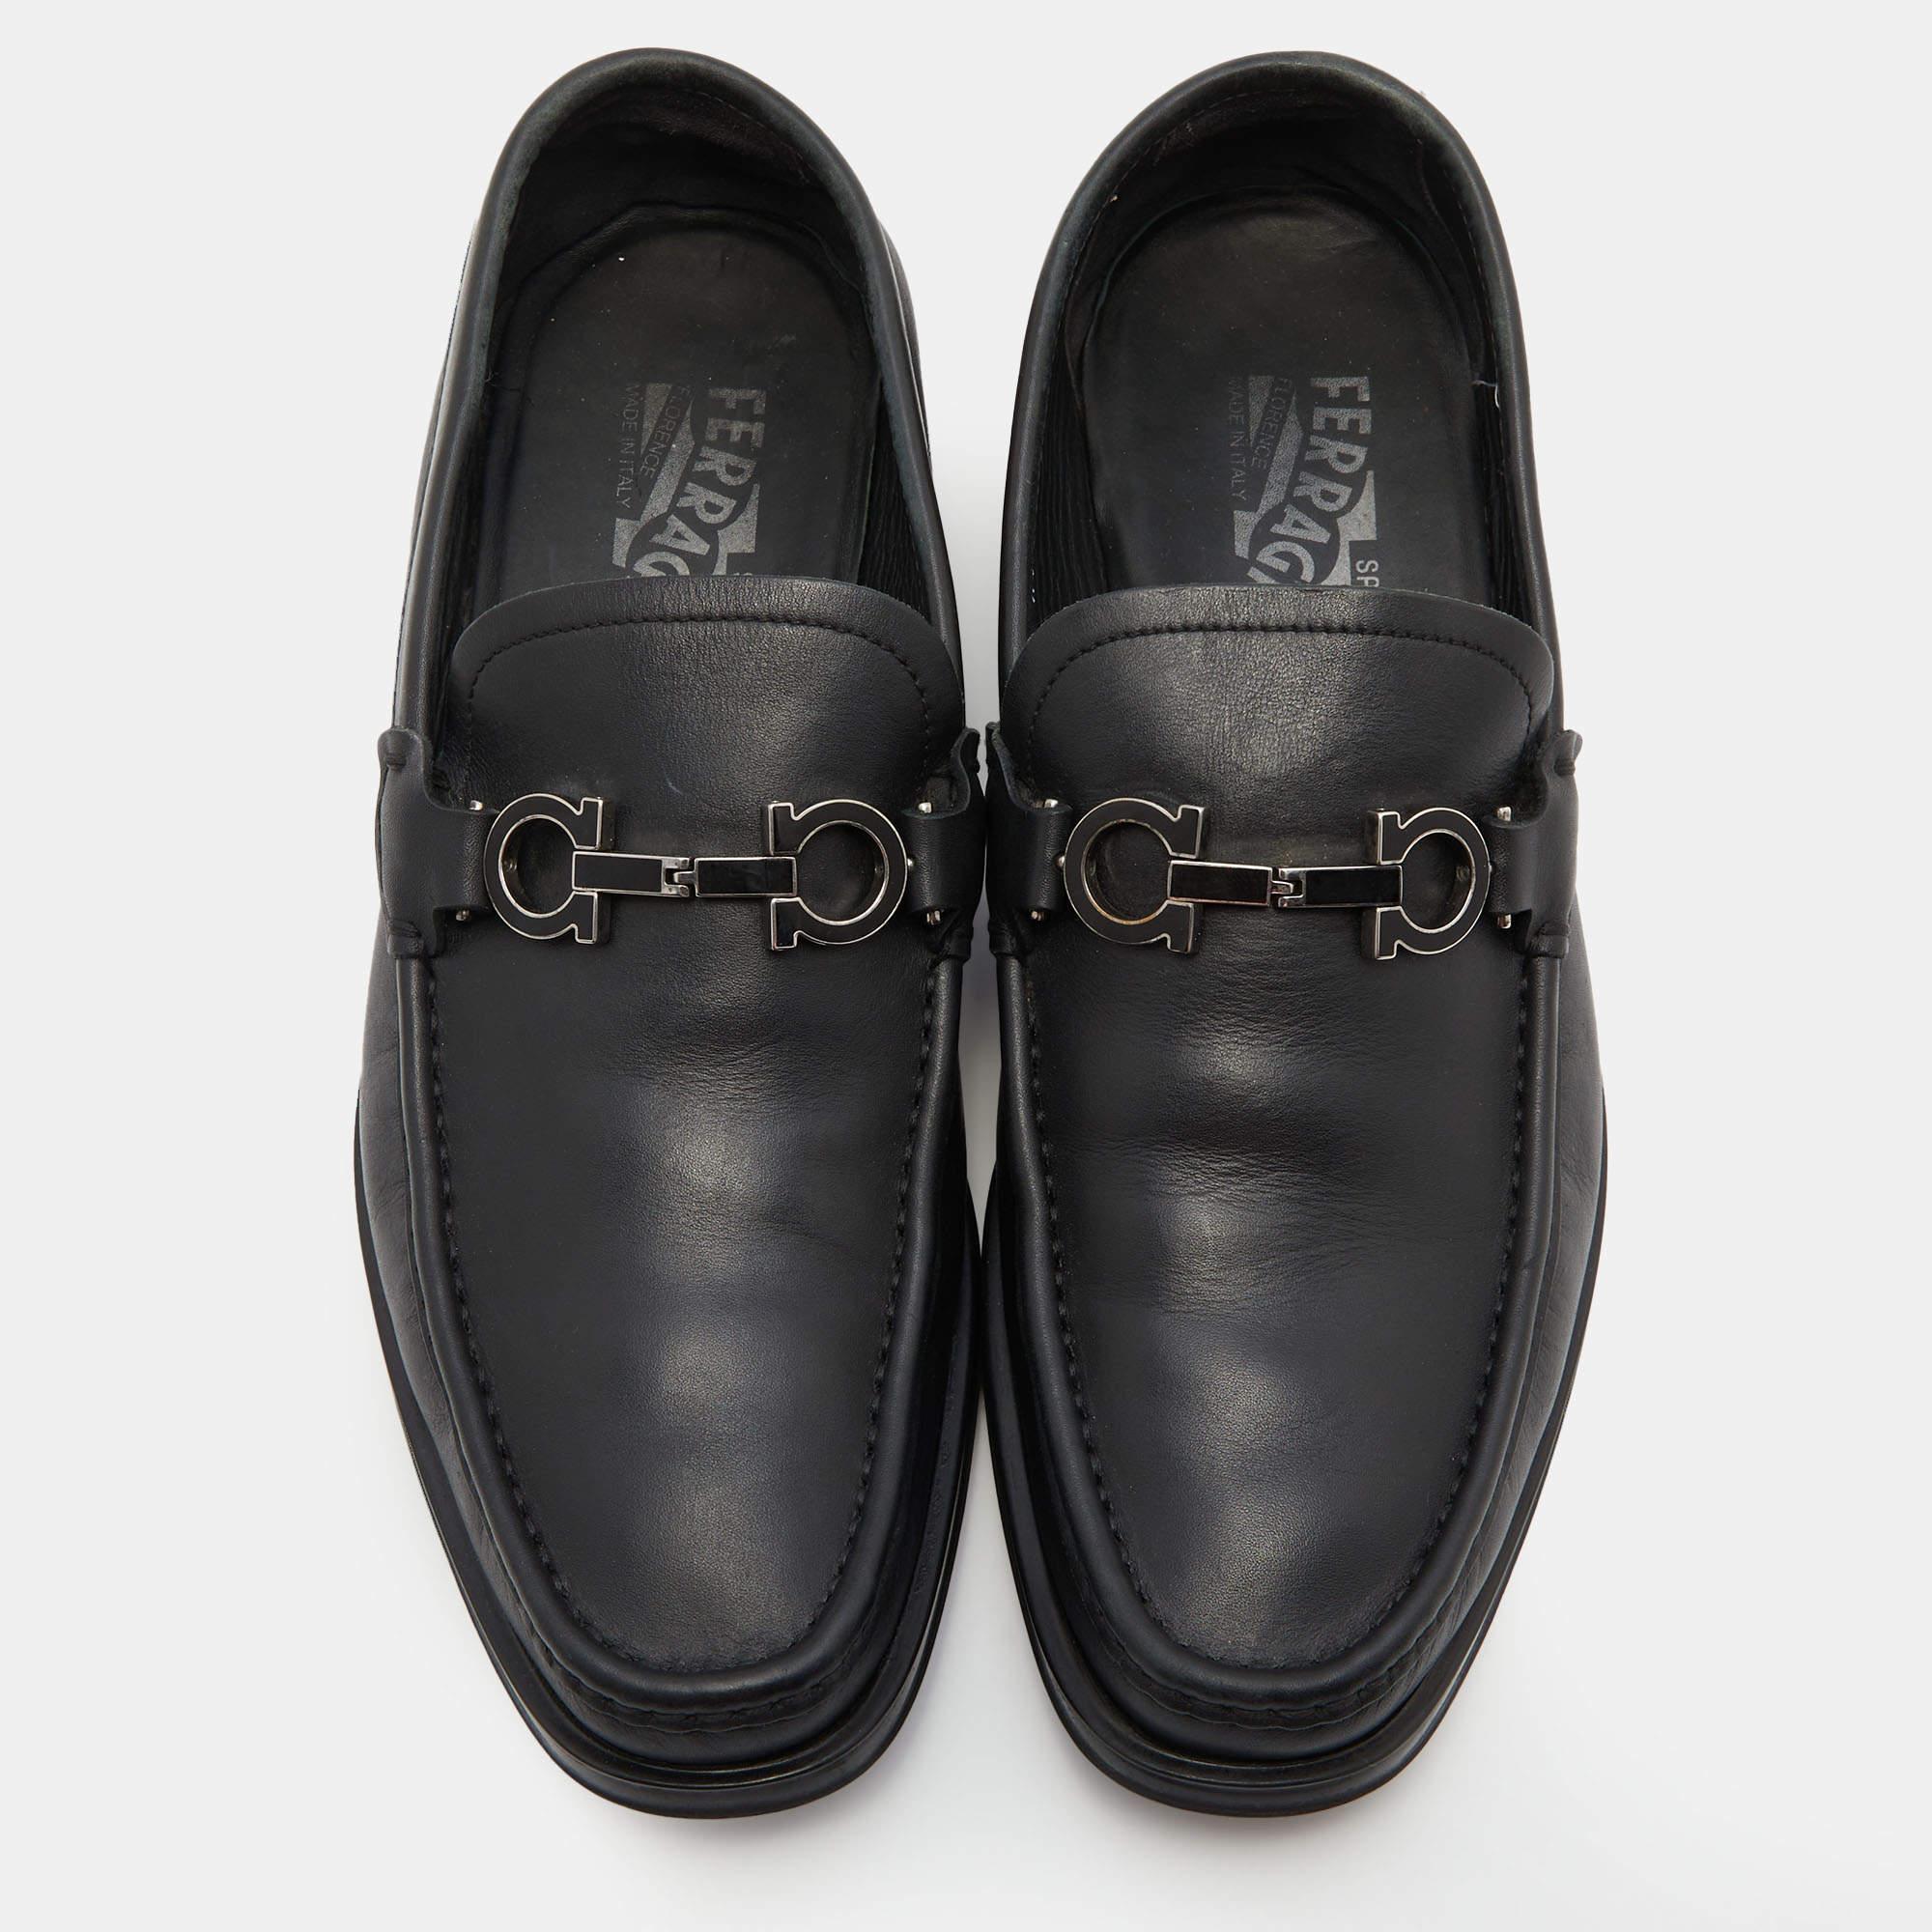 Walk in style and confidence as you wear these loafers from the House of Salvatore Ferragamo! They are designed using black leather, with a silver-toned Gancini Bit motif placed on the vamps. They flaunt an easy slip-on style. Comfortable and